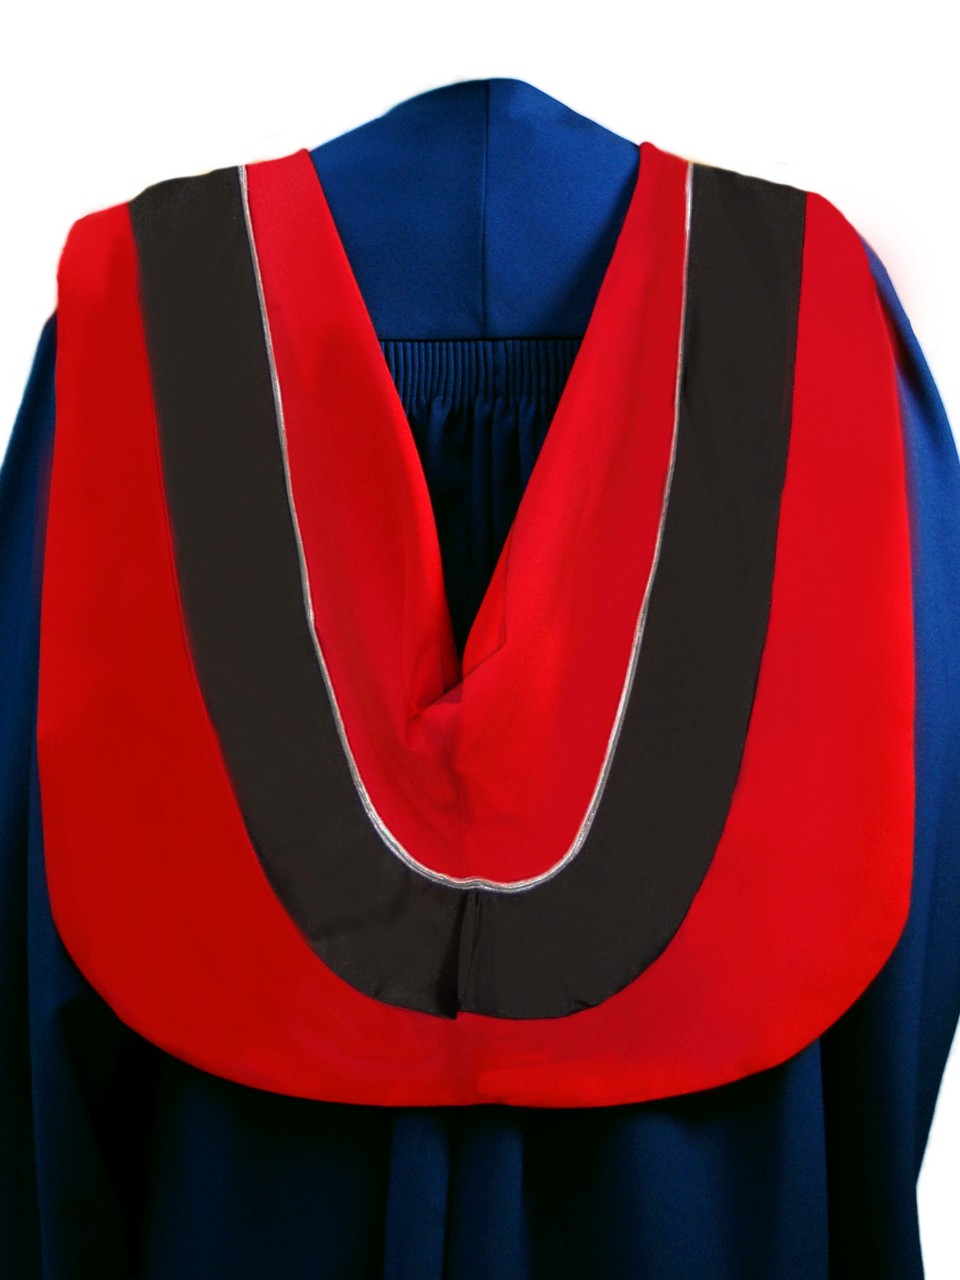 The Master of Digital Media hood is red with wide black border and grey cording